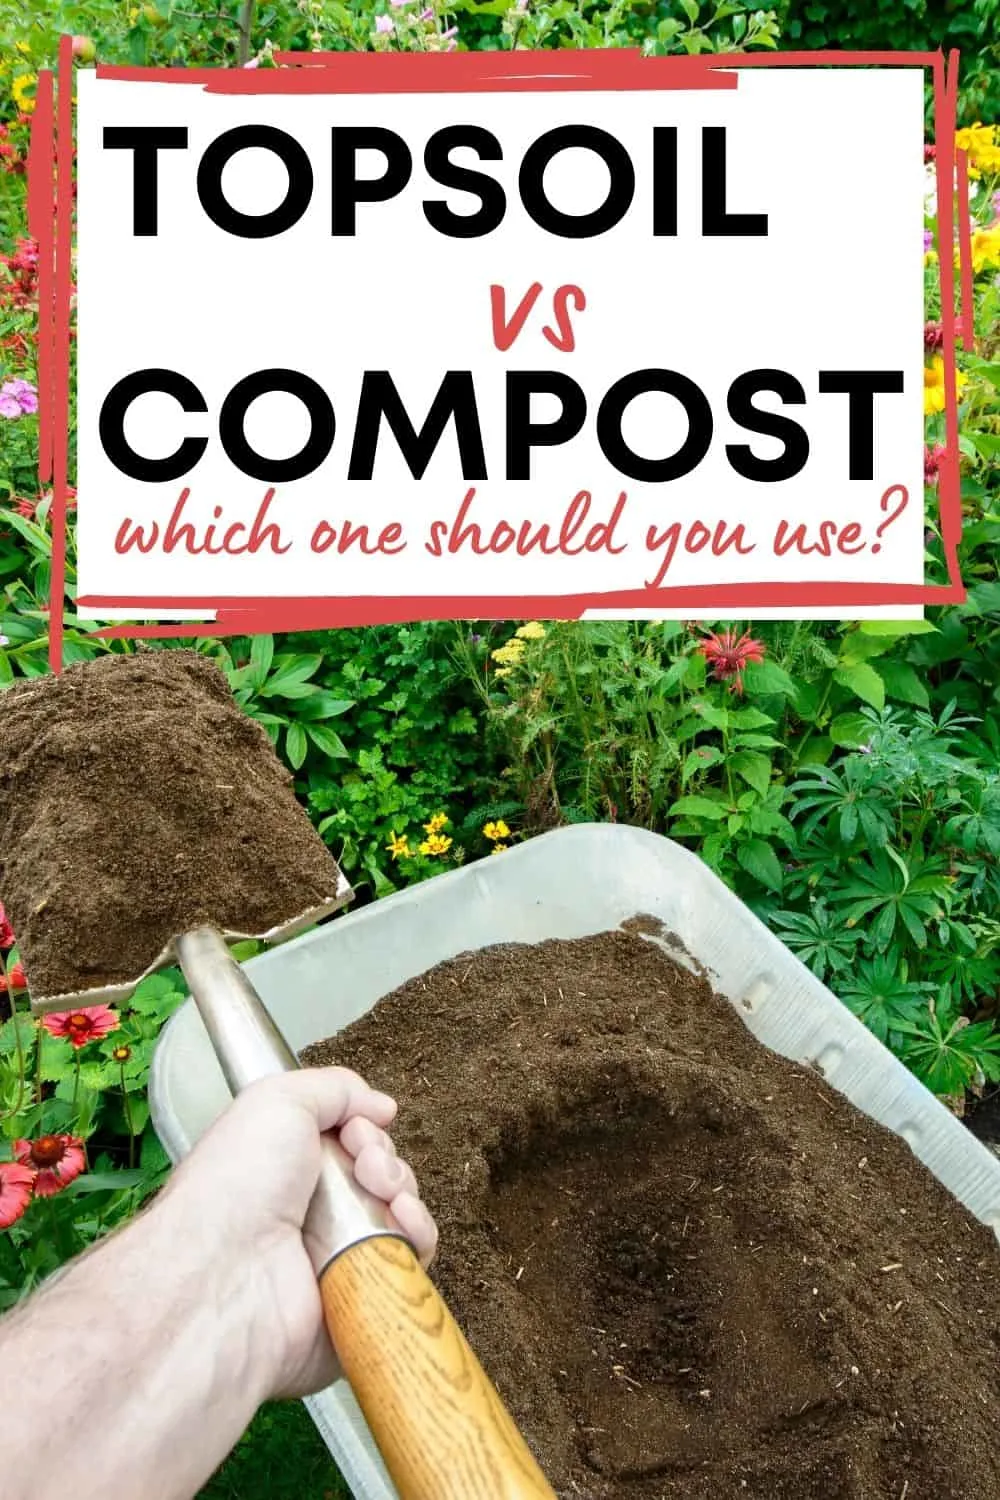 Topsoil vs compost: which one should you use?